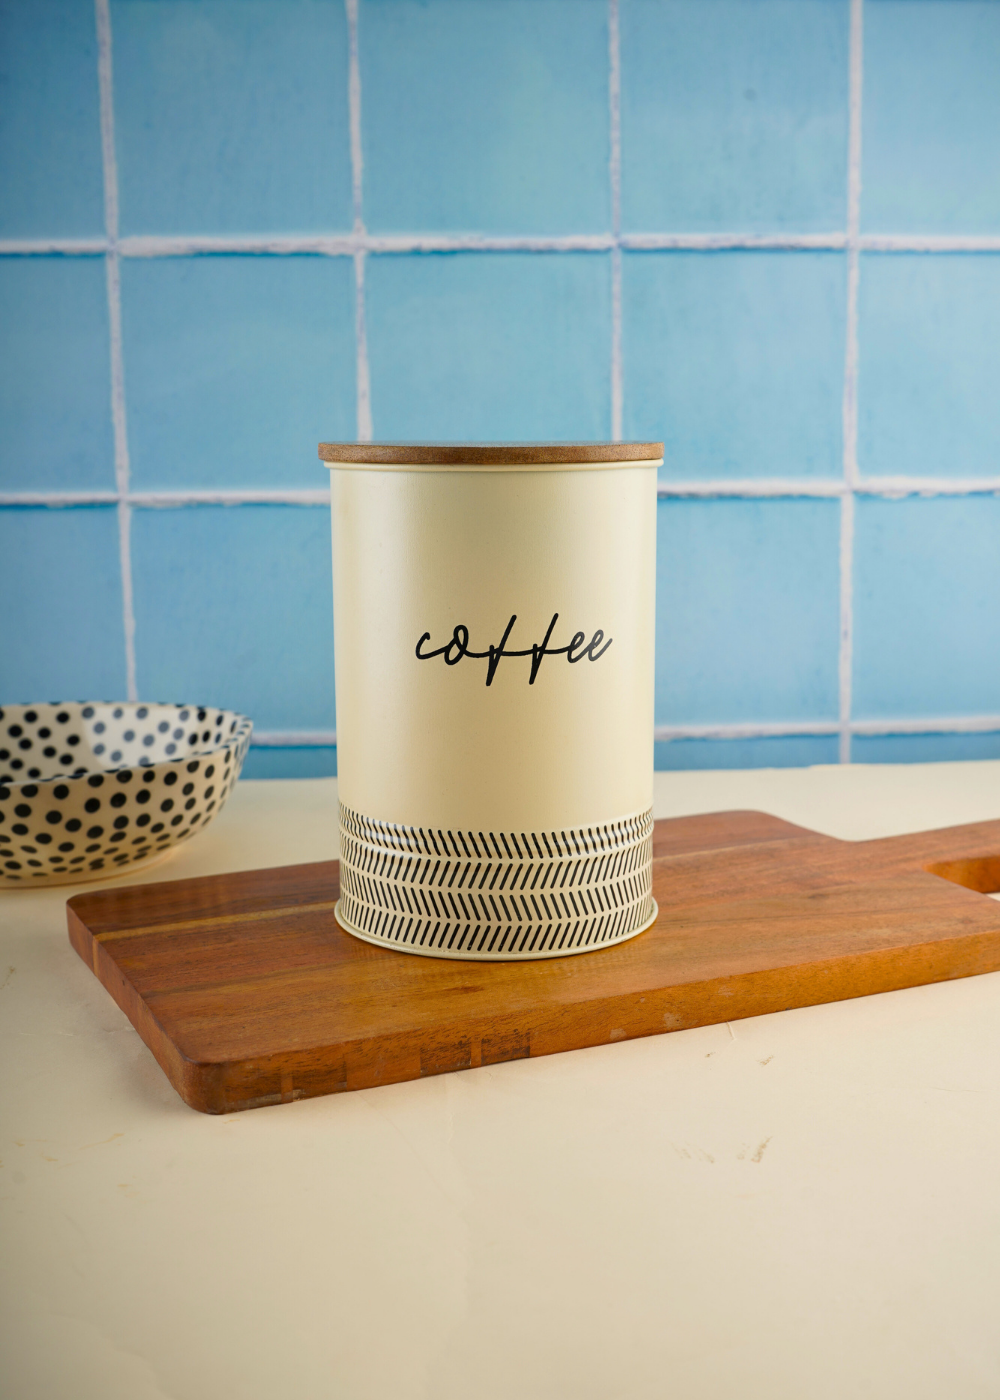 White & black coffee jar on wooden surface